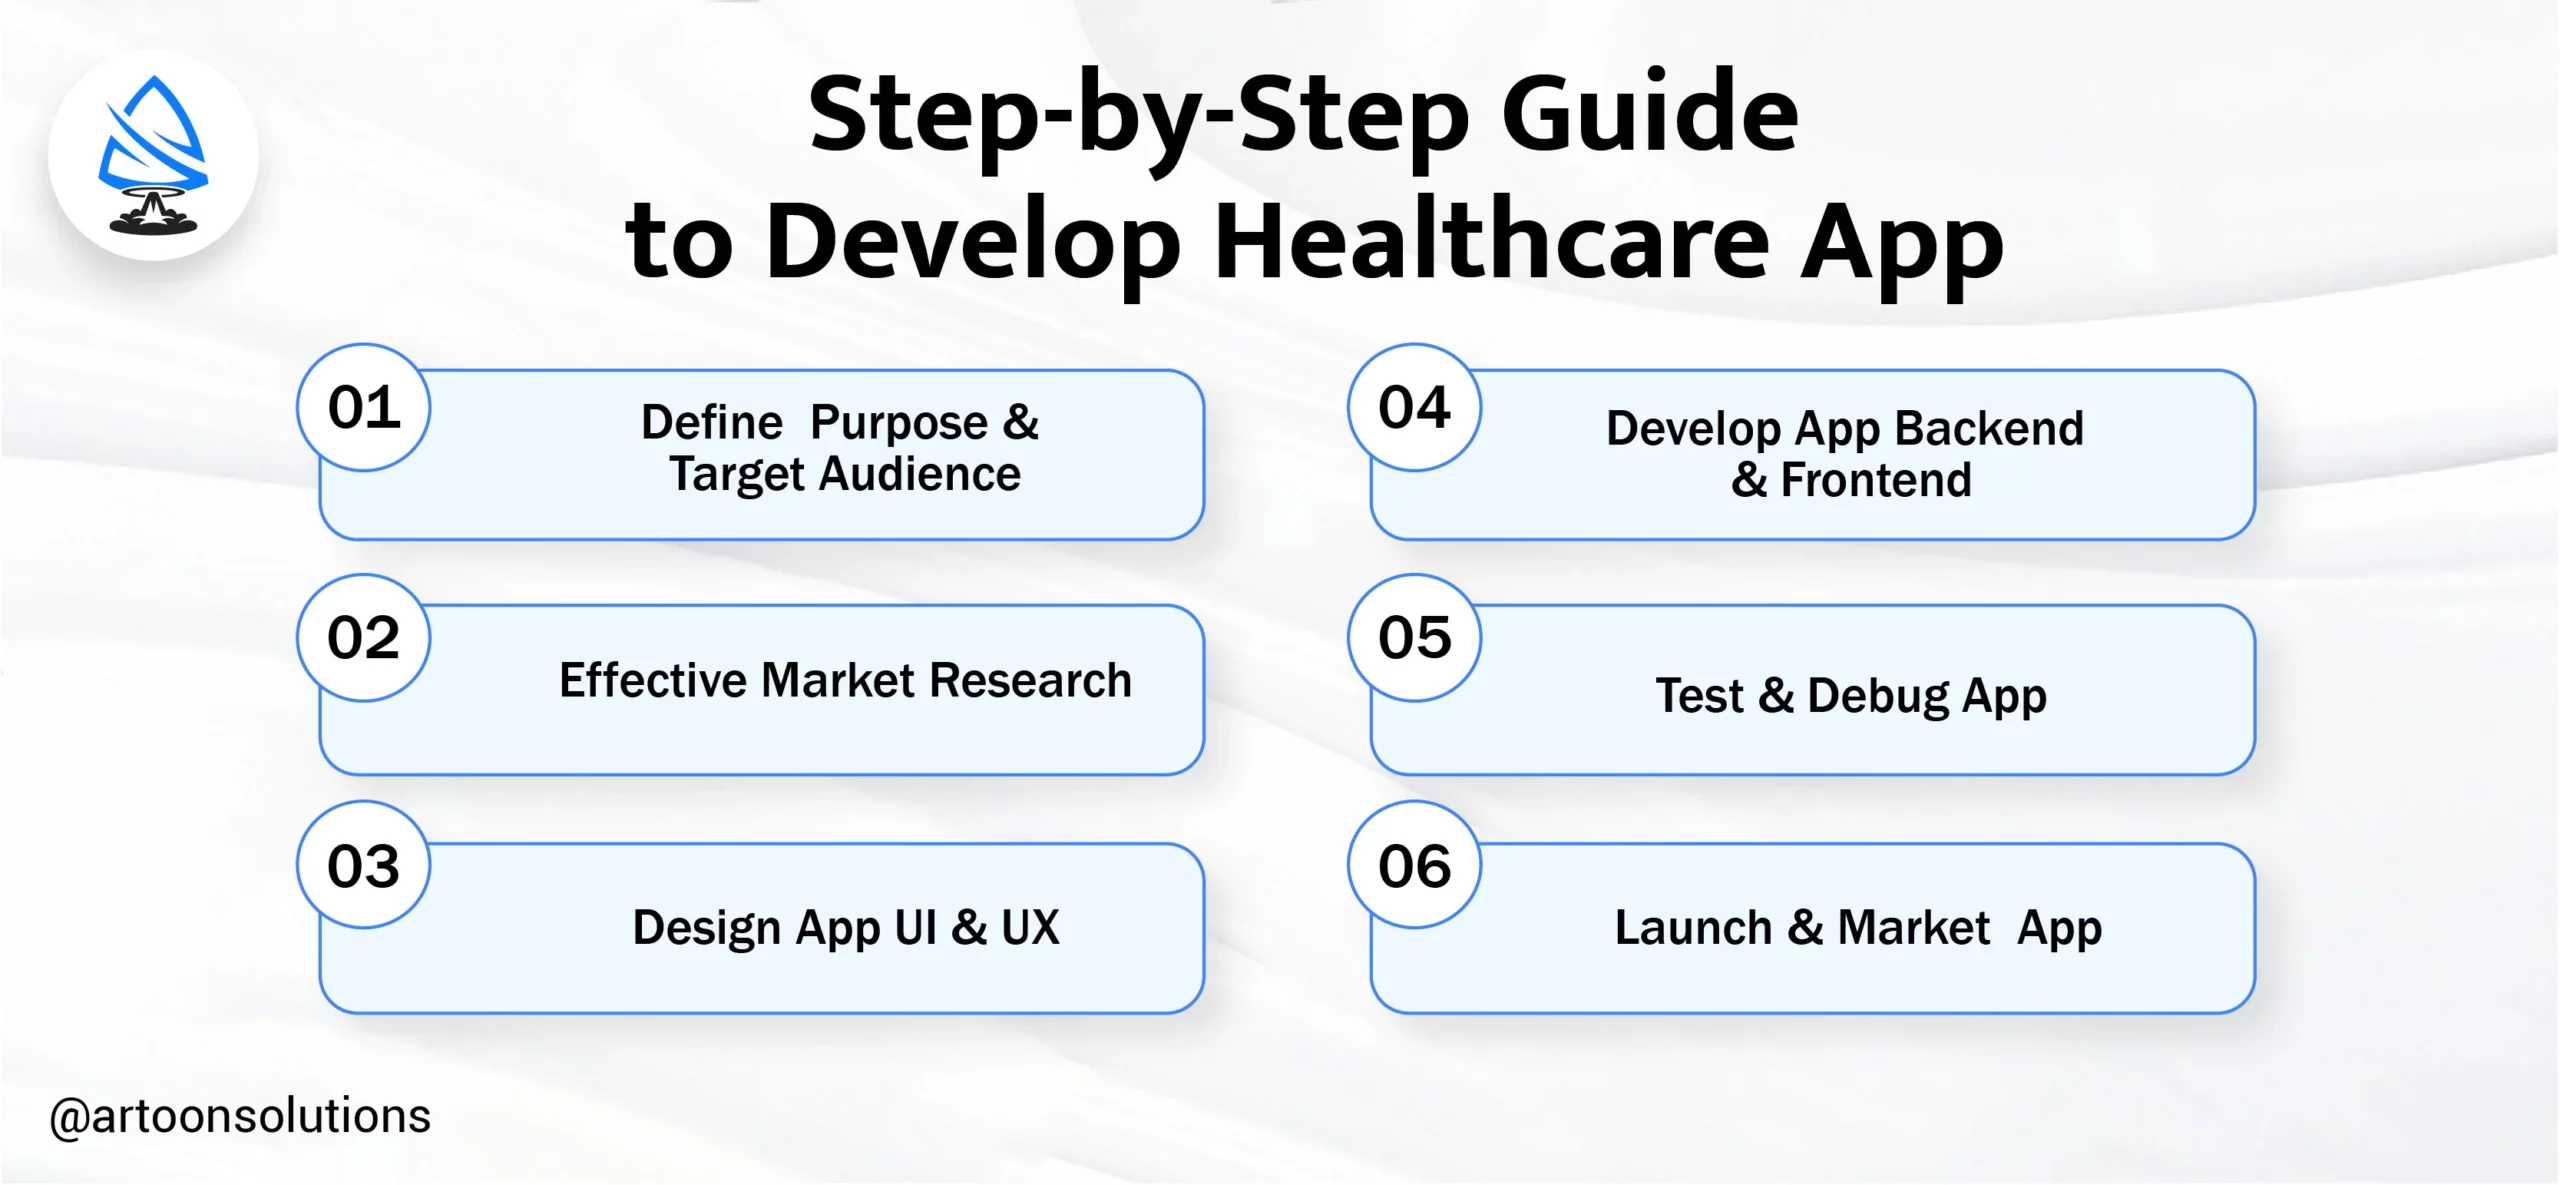 Step-by-Step Guide to Develop Healthcare App